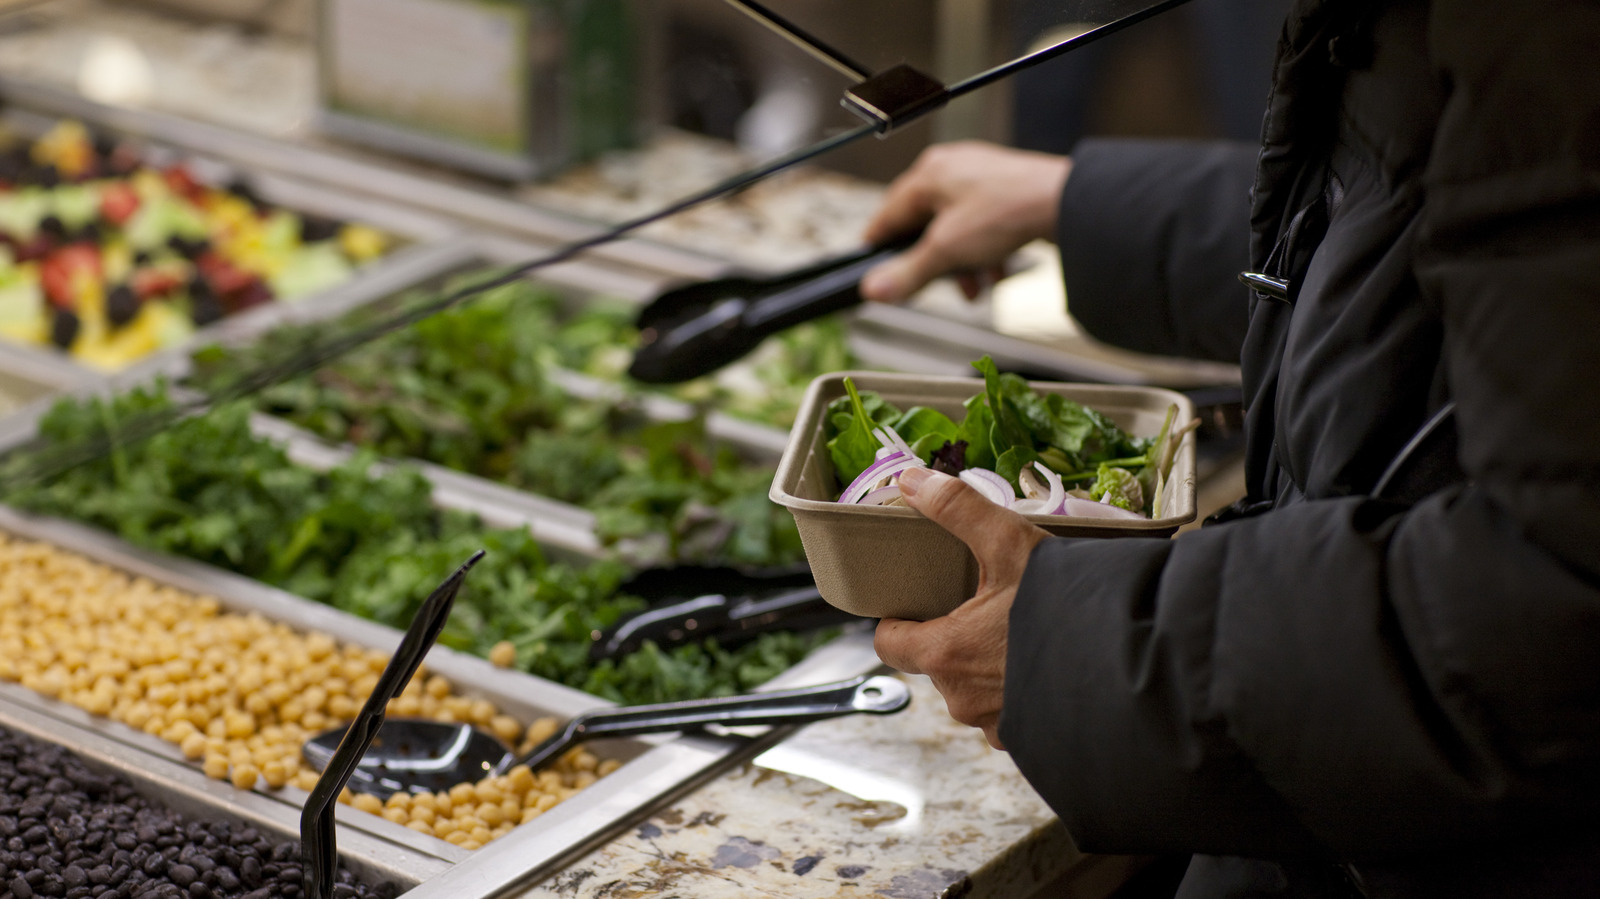 Grocery Stores Often Use Old Produce For The Salad Bar. Should You
Care?